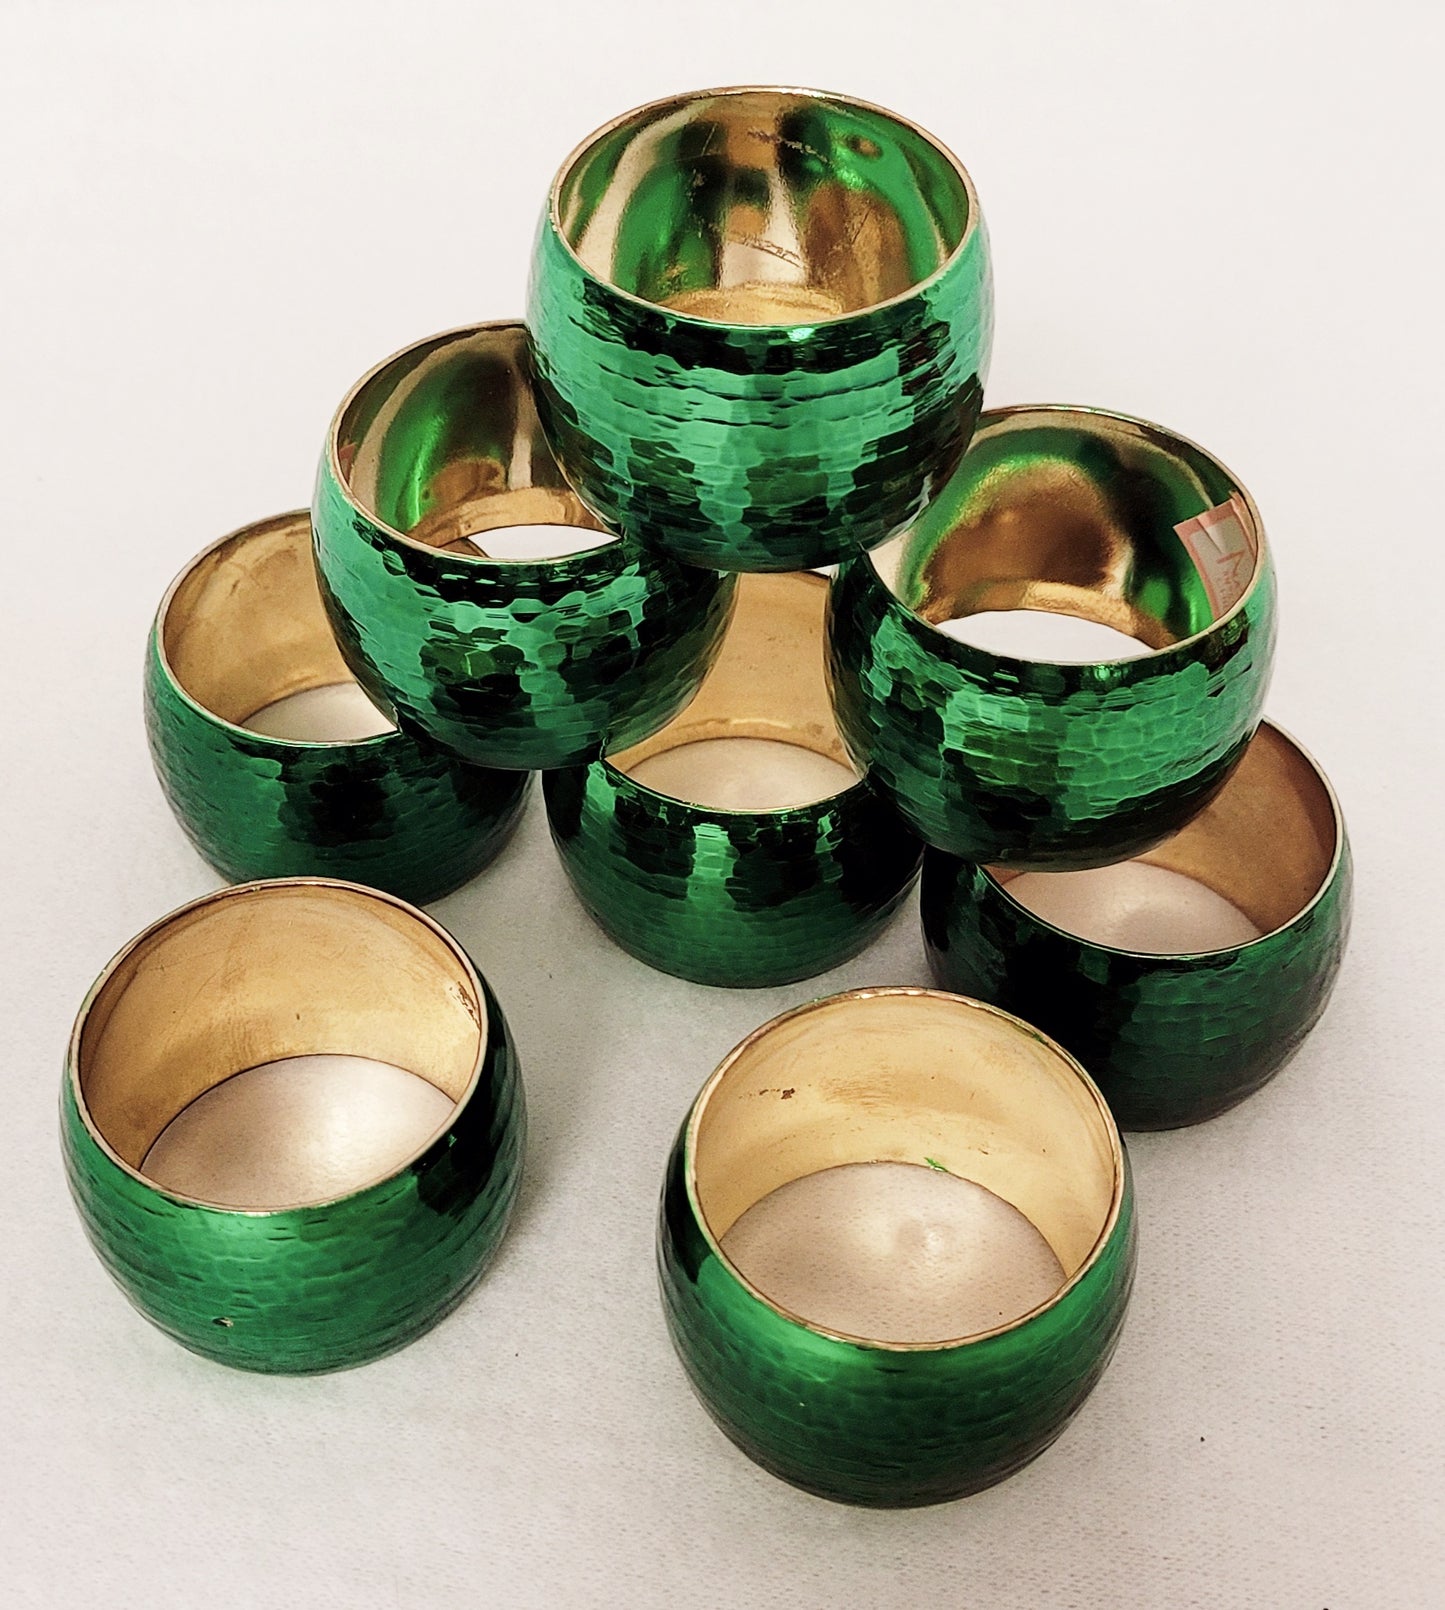 New - 8 Green Hammered Silver Napkin Rings